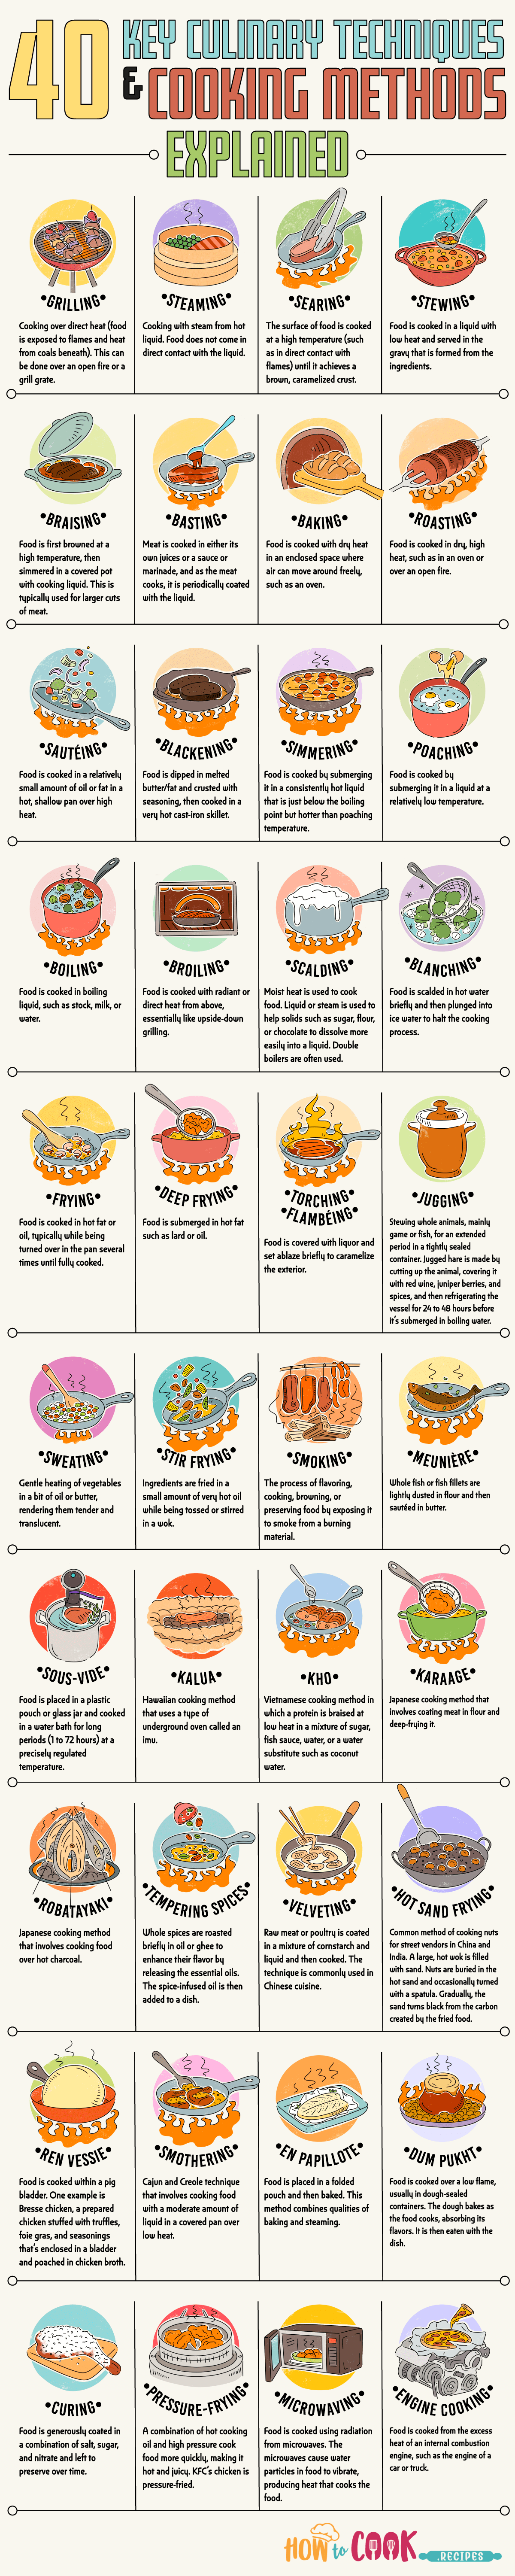 40 Key Culinary Techniques and Cooking Methods - Infographic